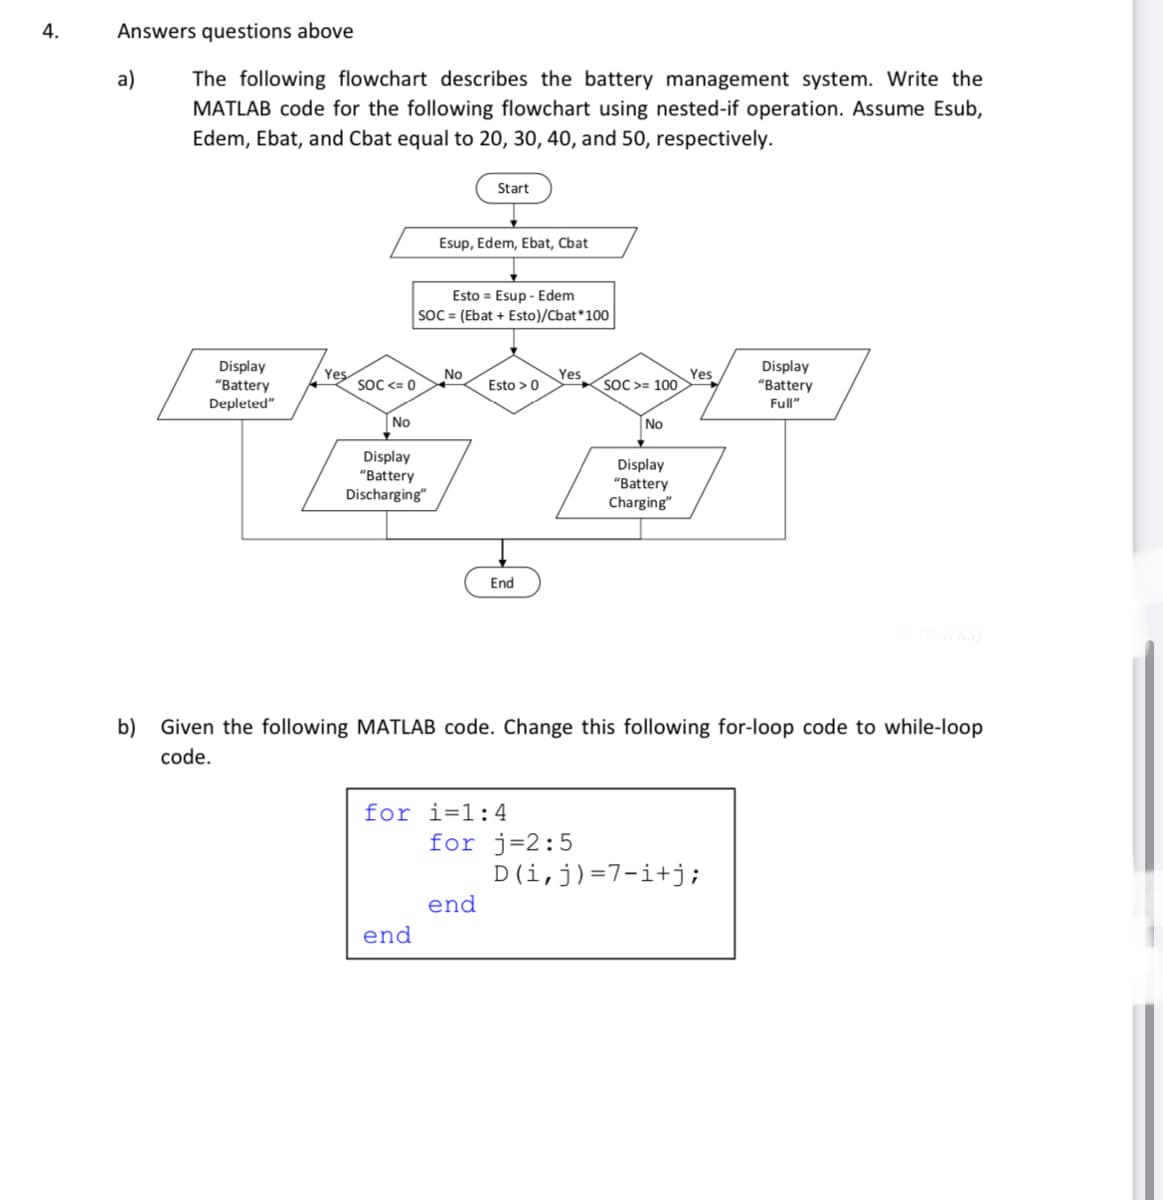 4.
Answers questions above
a)
The following flowchart describes the battery management system. Write the
MATLAB code for the following flowchart using nested-if operation. Assume Esub,
Edem, Ebat, and Cbat equal to 20, 30, 40, and 50, respectively.
Display
"Battery
Depleted"
Yes
SOC <= 0
No
Display
"Battery
Discharging"
Esup, Edem, Ebat, Chat
Esto Esup - Edem
SOC = (Ebat + Esto)/Cbat* 100
end
Start
No
Esto > 0
End
for i=1:4
end
Yes
for j=2:5
SOC>= 100
No
b) Given the following MATLAB code. Change this following for-loop code to while-loop
code.
Display
"Battery
Charging"
Yes
Display
"Battery
Full"
D(i, j)=7i+j;